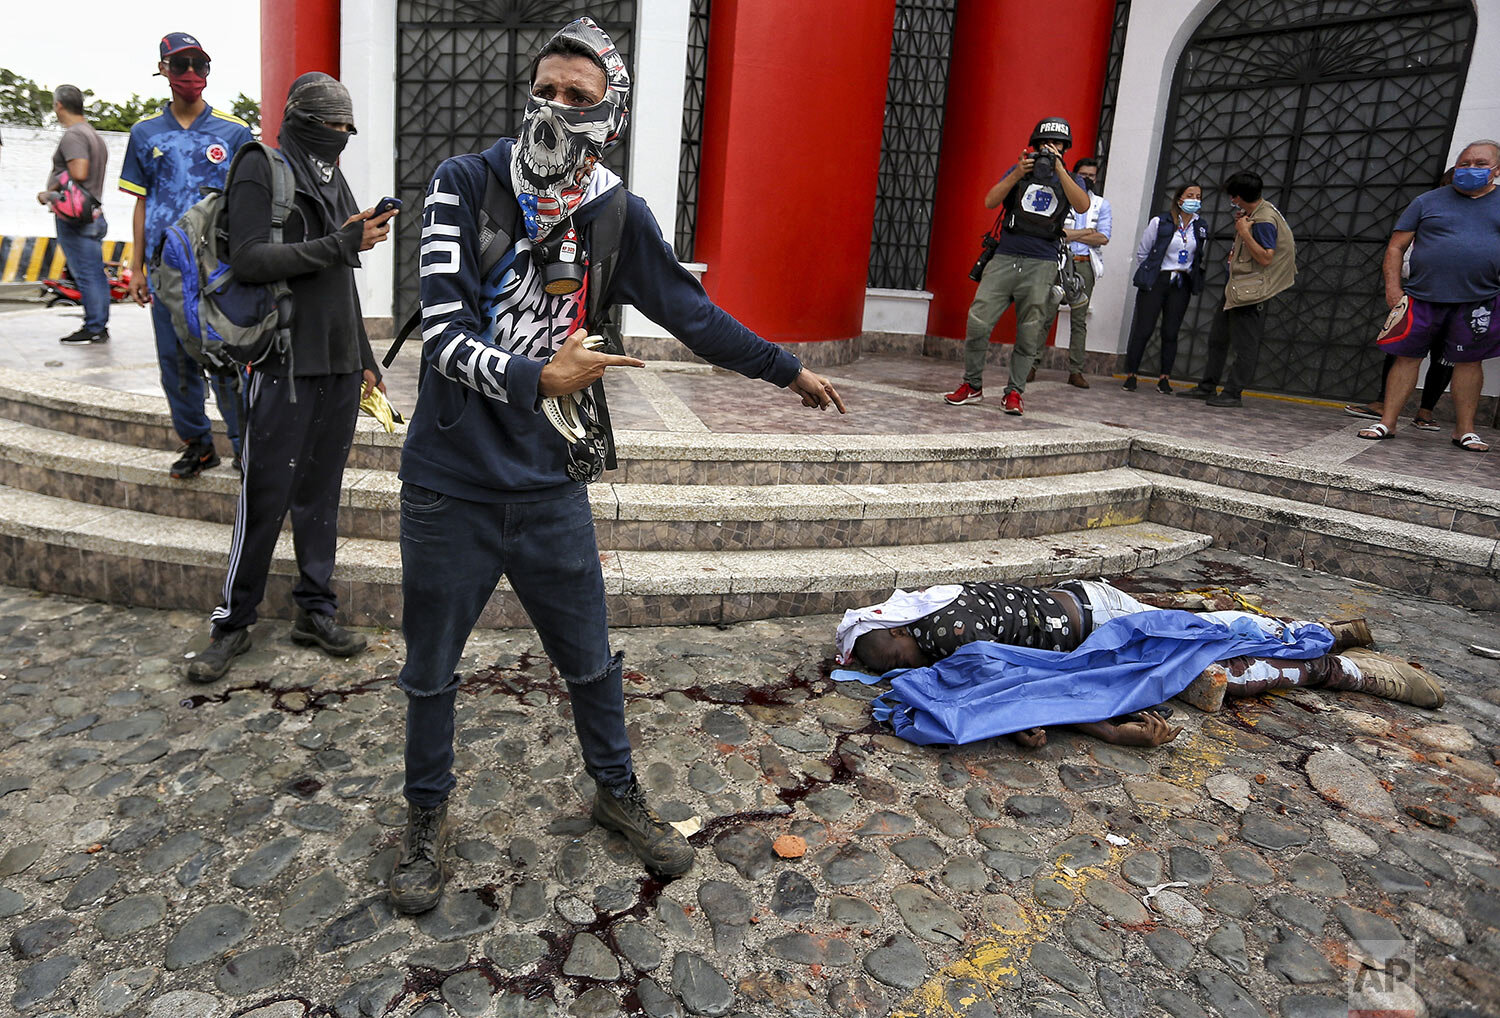  Anti-government protesters stand next to the body of Fredy Bermudez, an official of the Attorney General's office who protesters killed in retaliation for fatally shooting two protesters at a roadblock set up by demonstrators in Cali, Colombia, May 